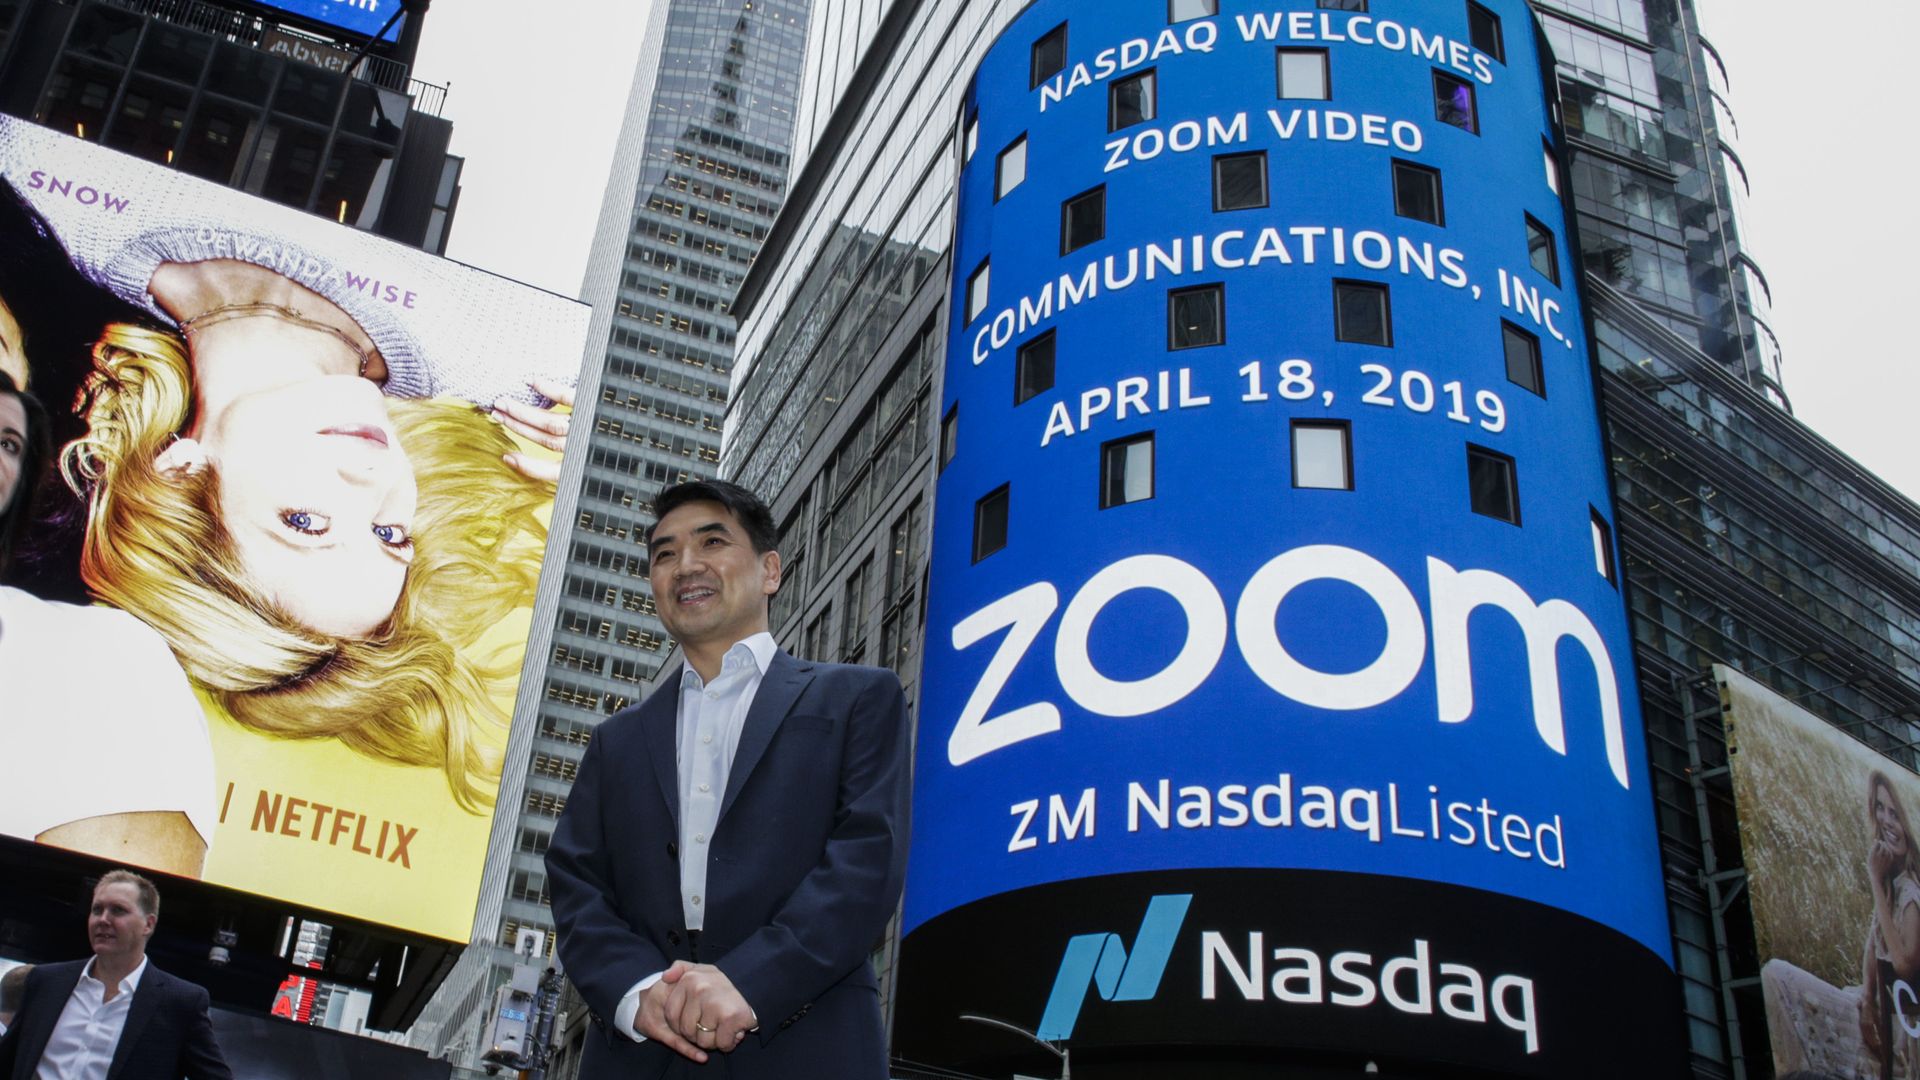 Photo of Zoom founder Eric Yuan on New York street under giant billboard with company name